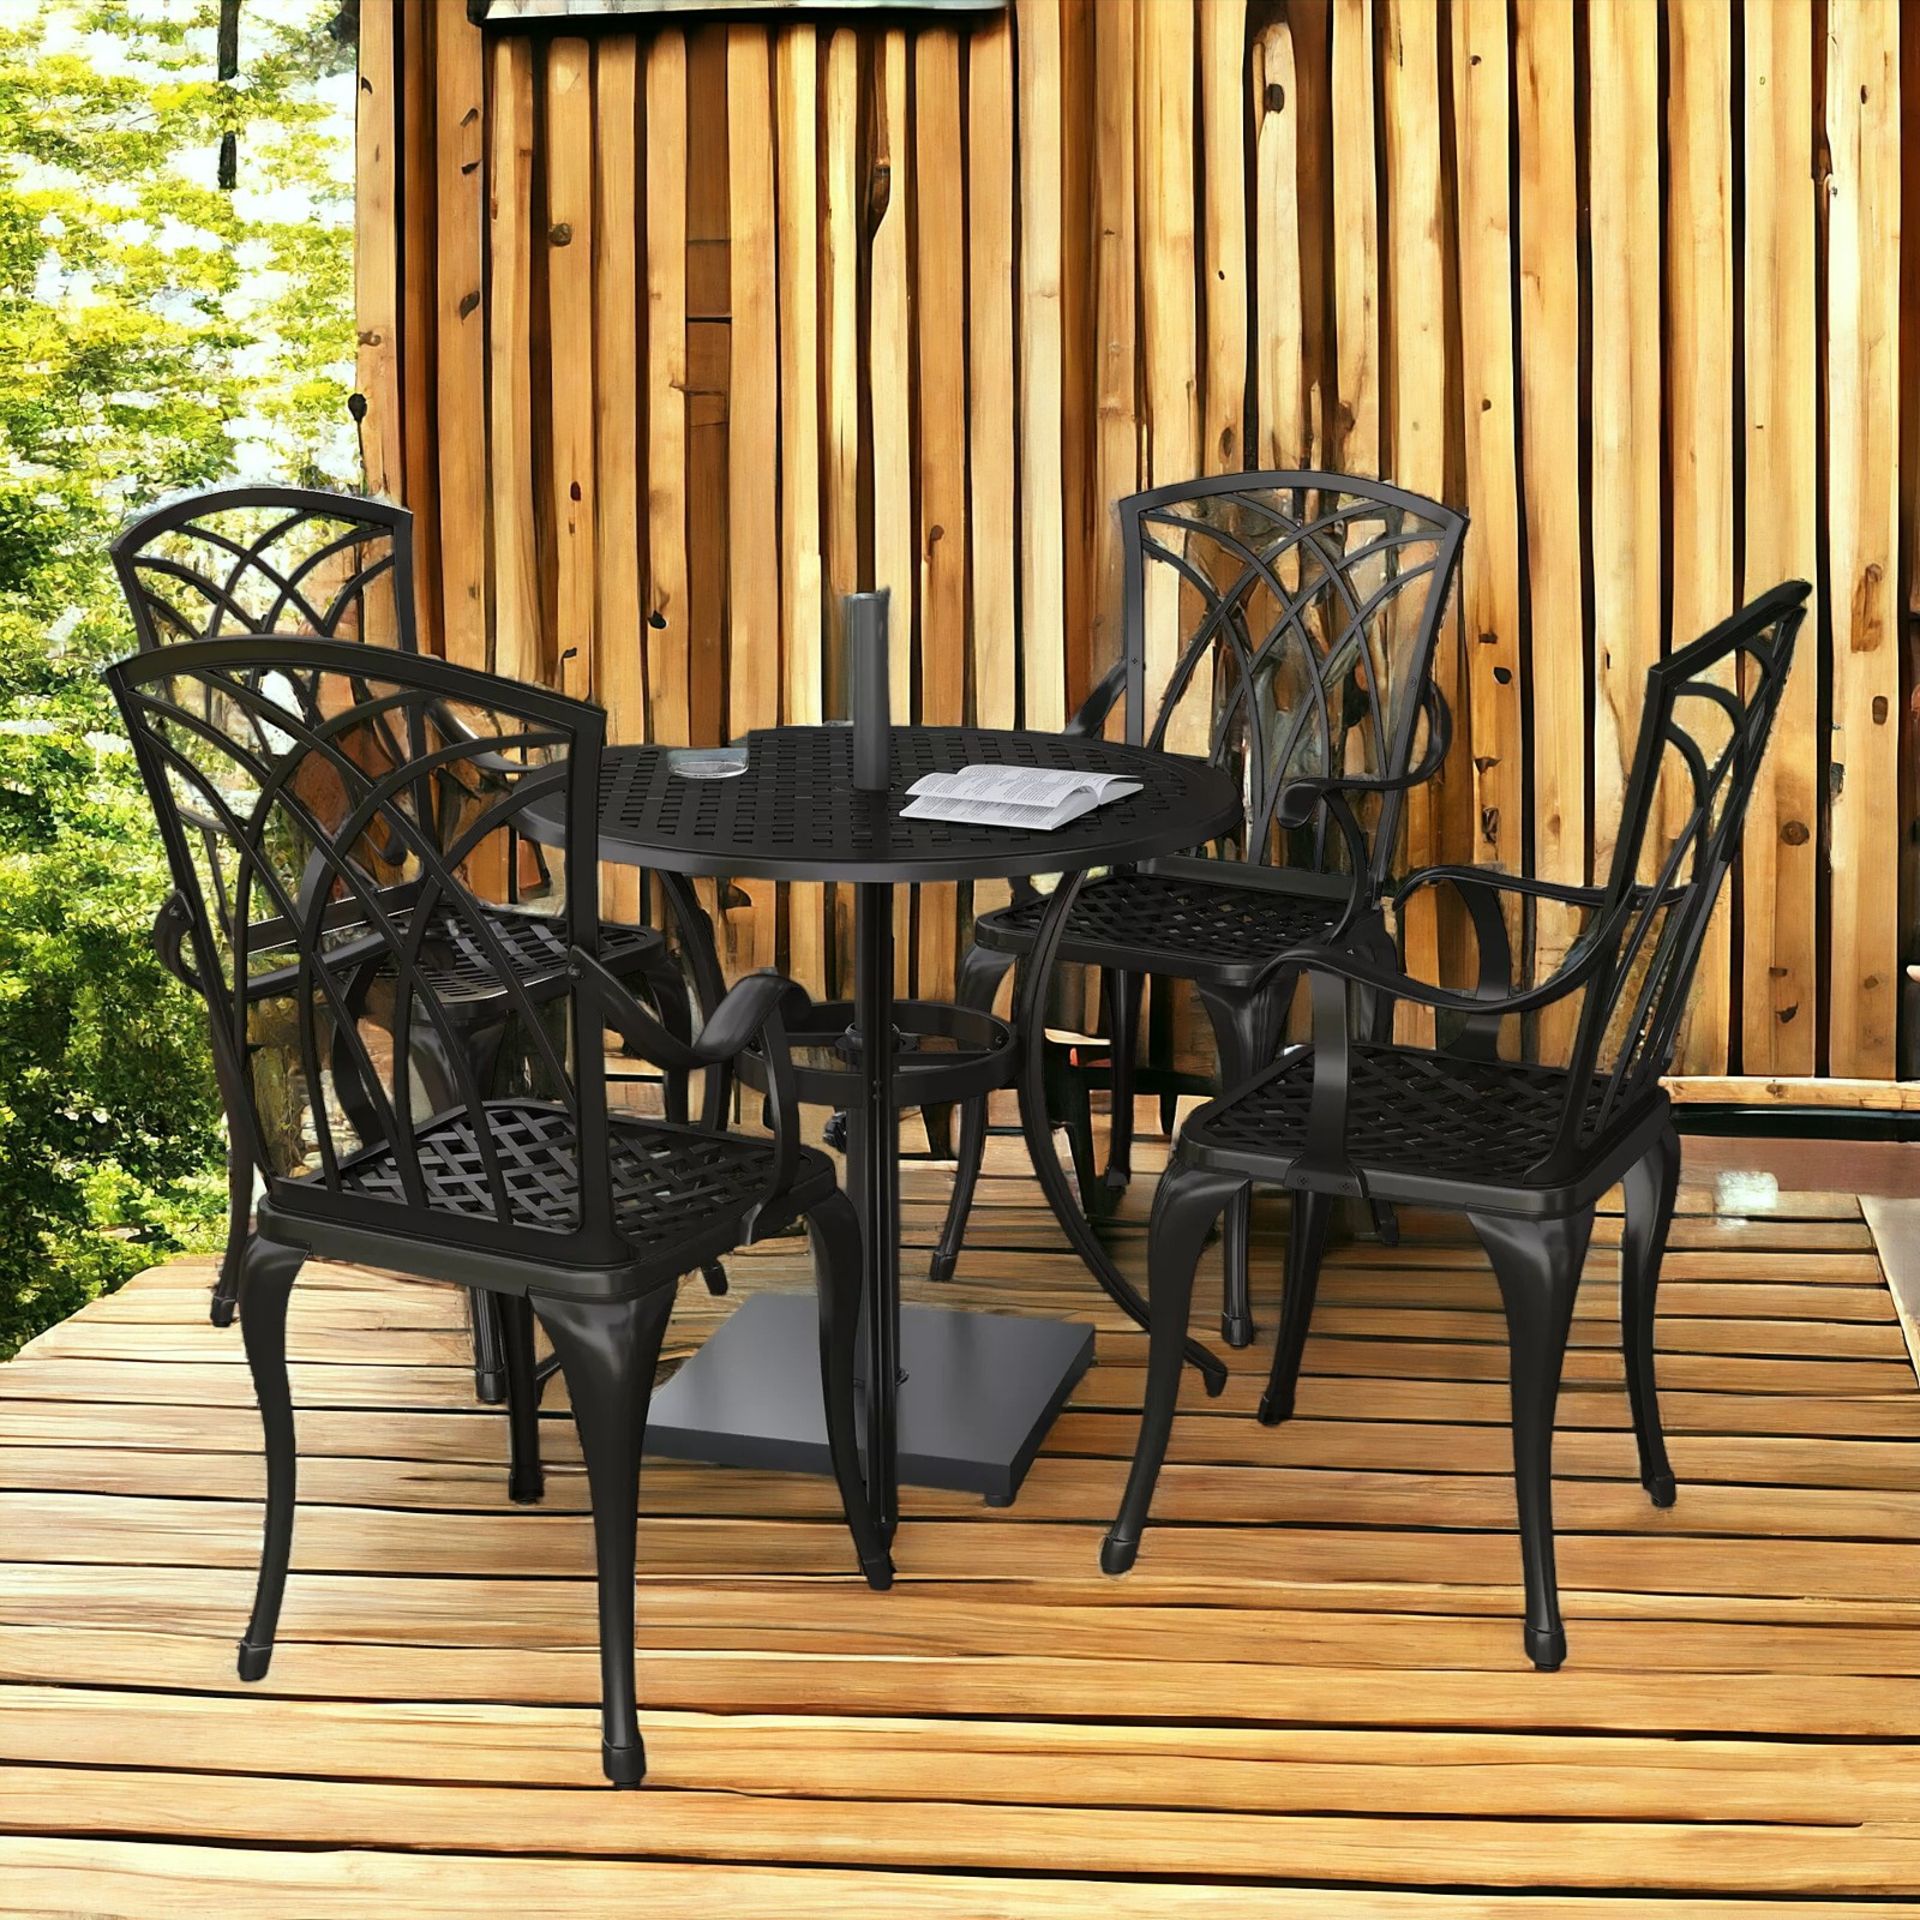 FREE DELIVERY- BRAND NEW 5 PCS COFFEE TABLE CHAIRS OUTDOOR GARDEN FURNITURE SET W/ - Image 2 of 3